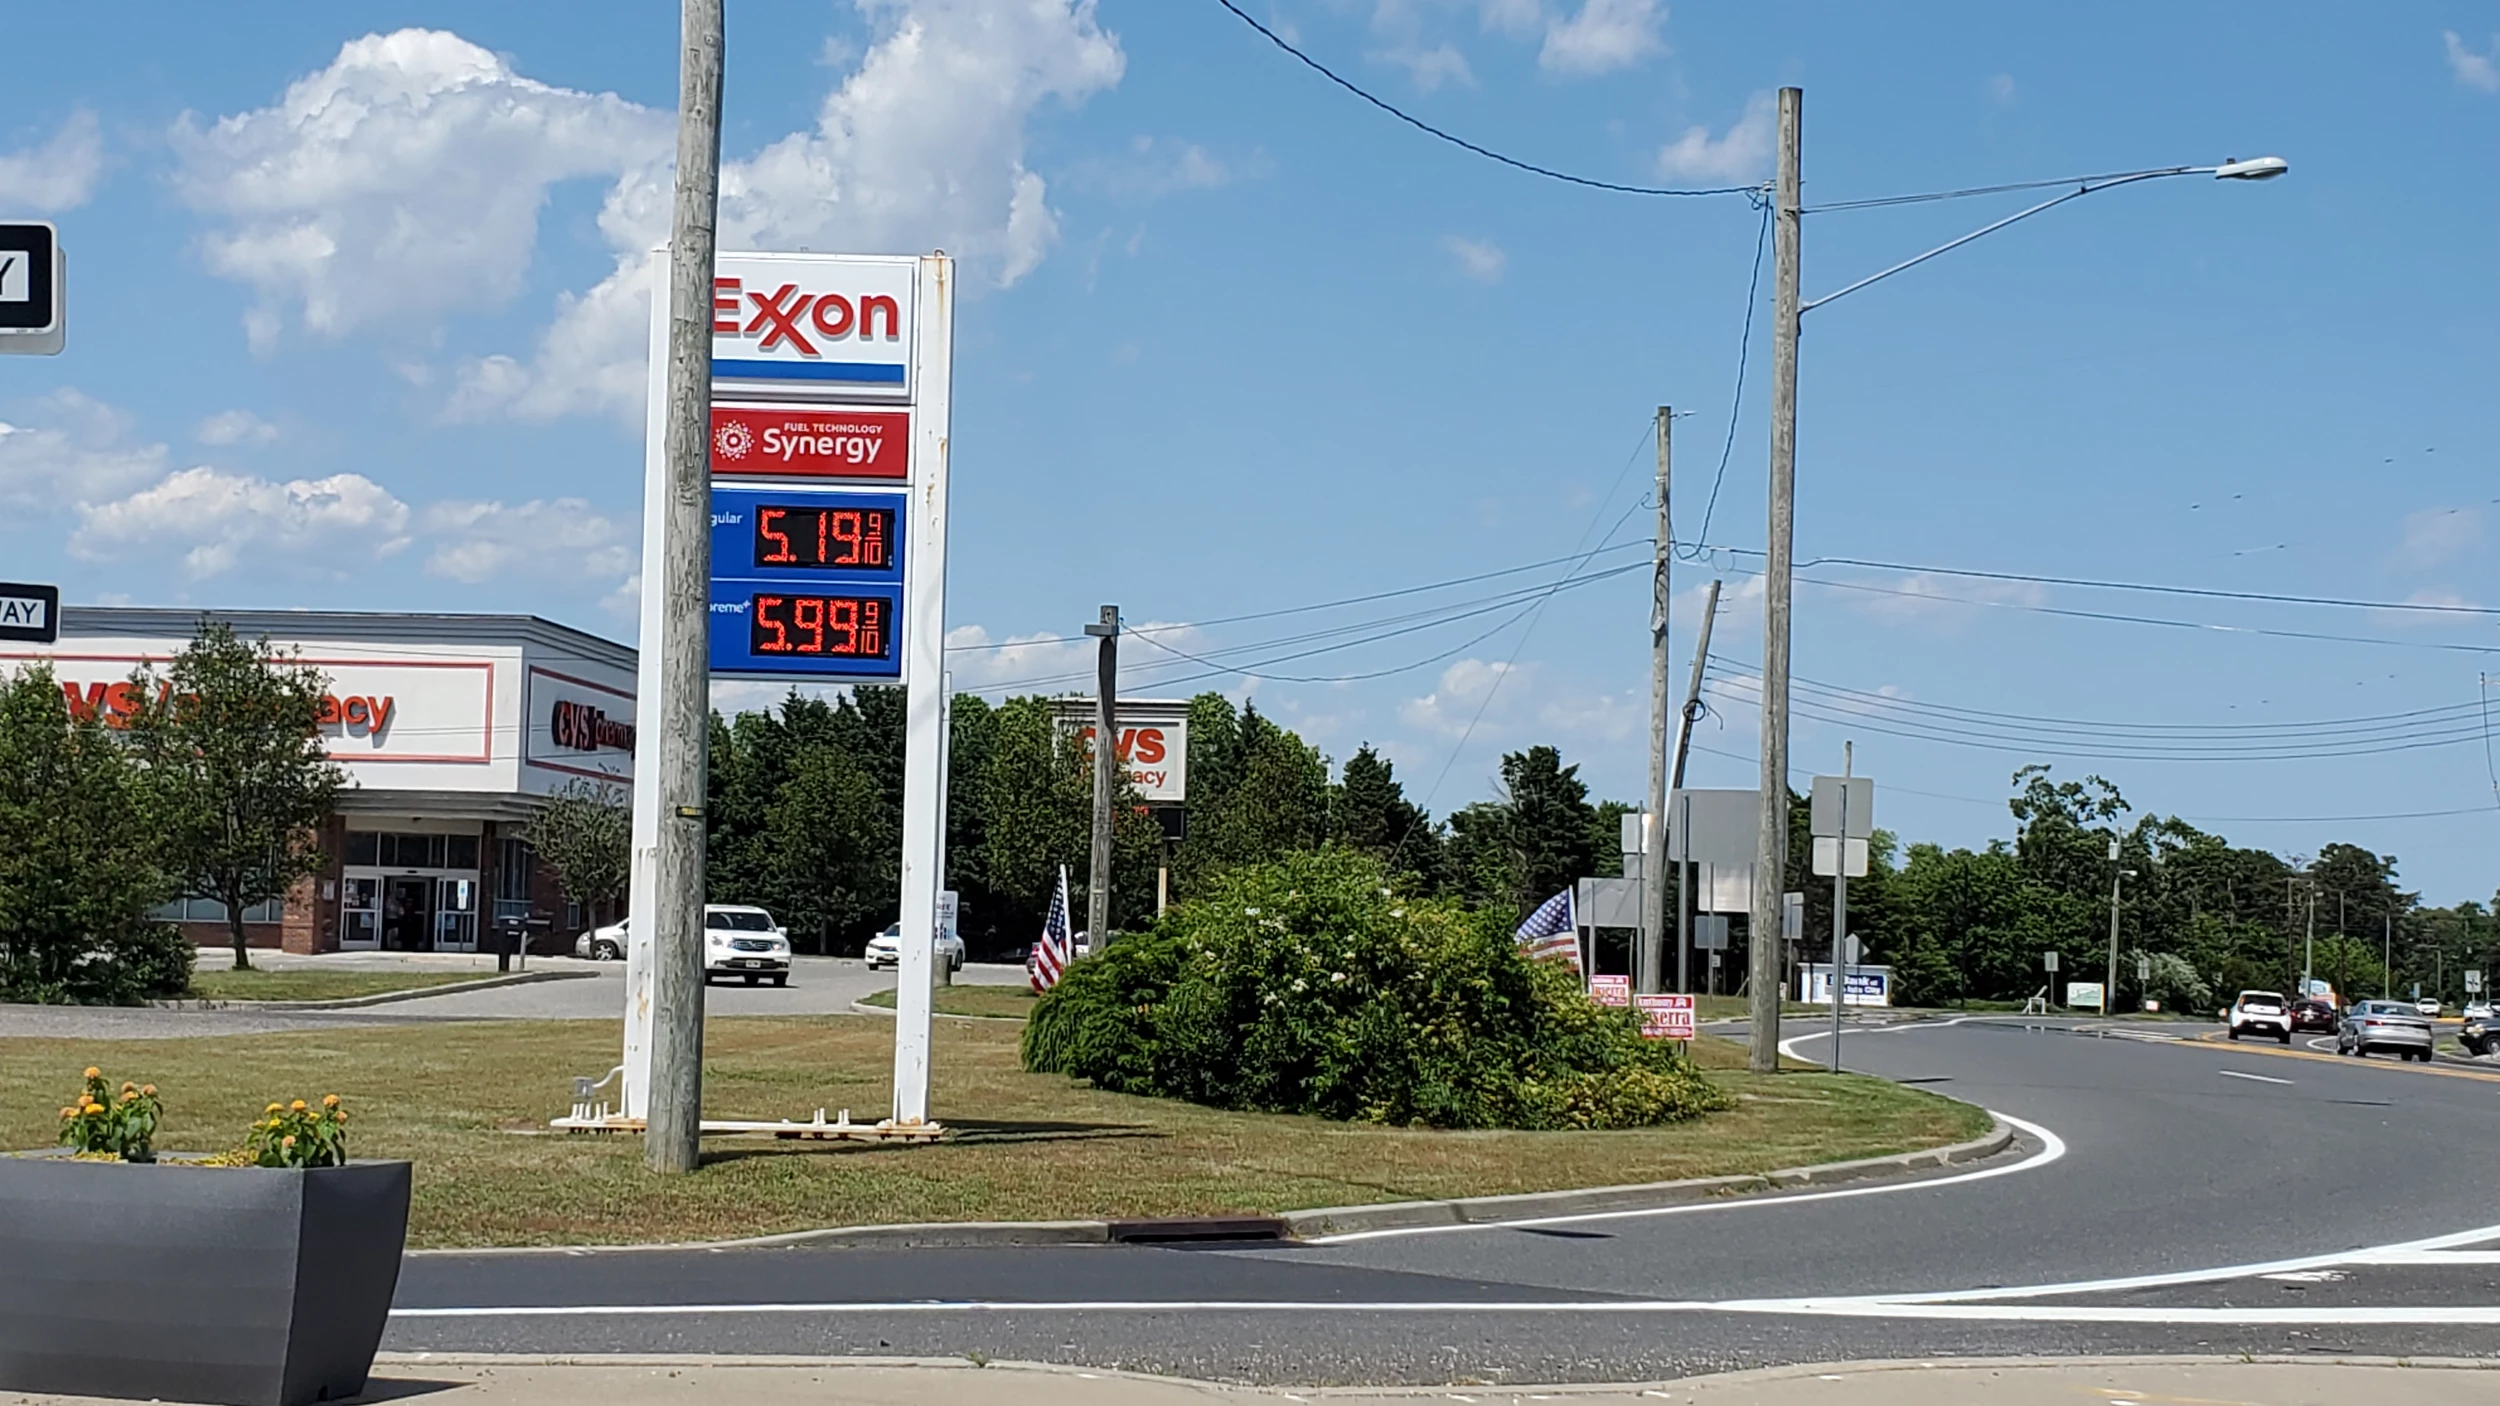 $5.19 gas in Cape May County NJ in June 2022 - Photo: Chris Coleman